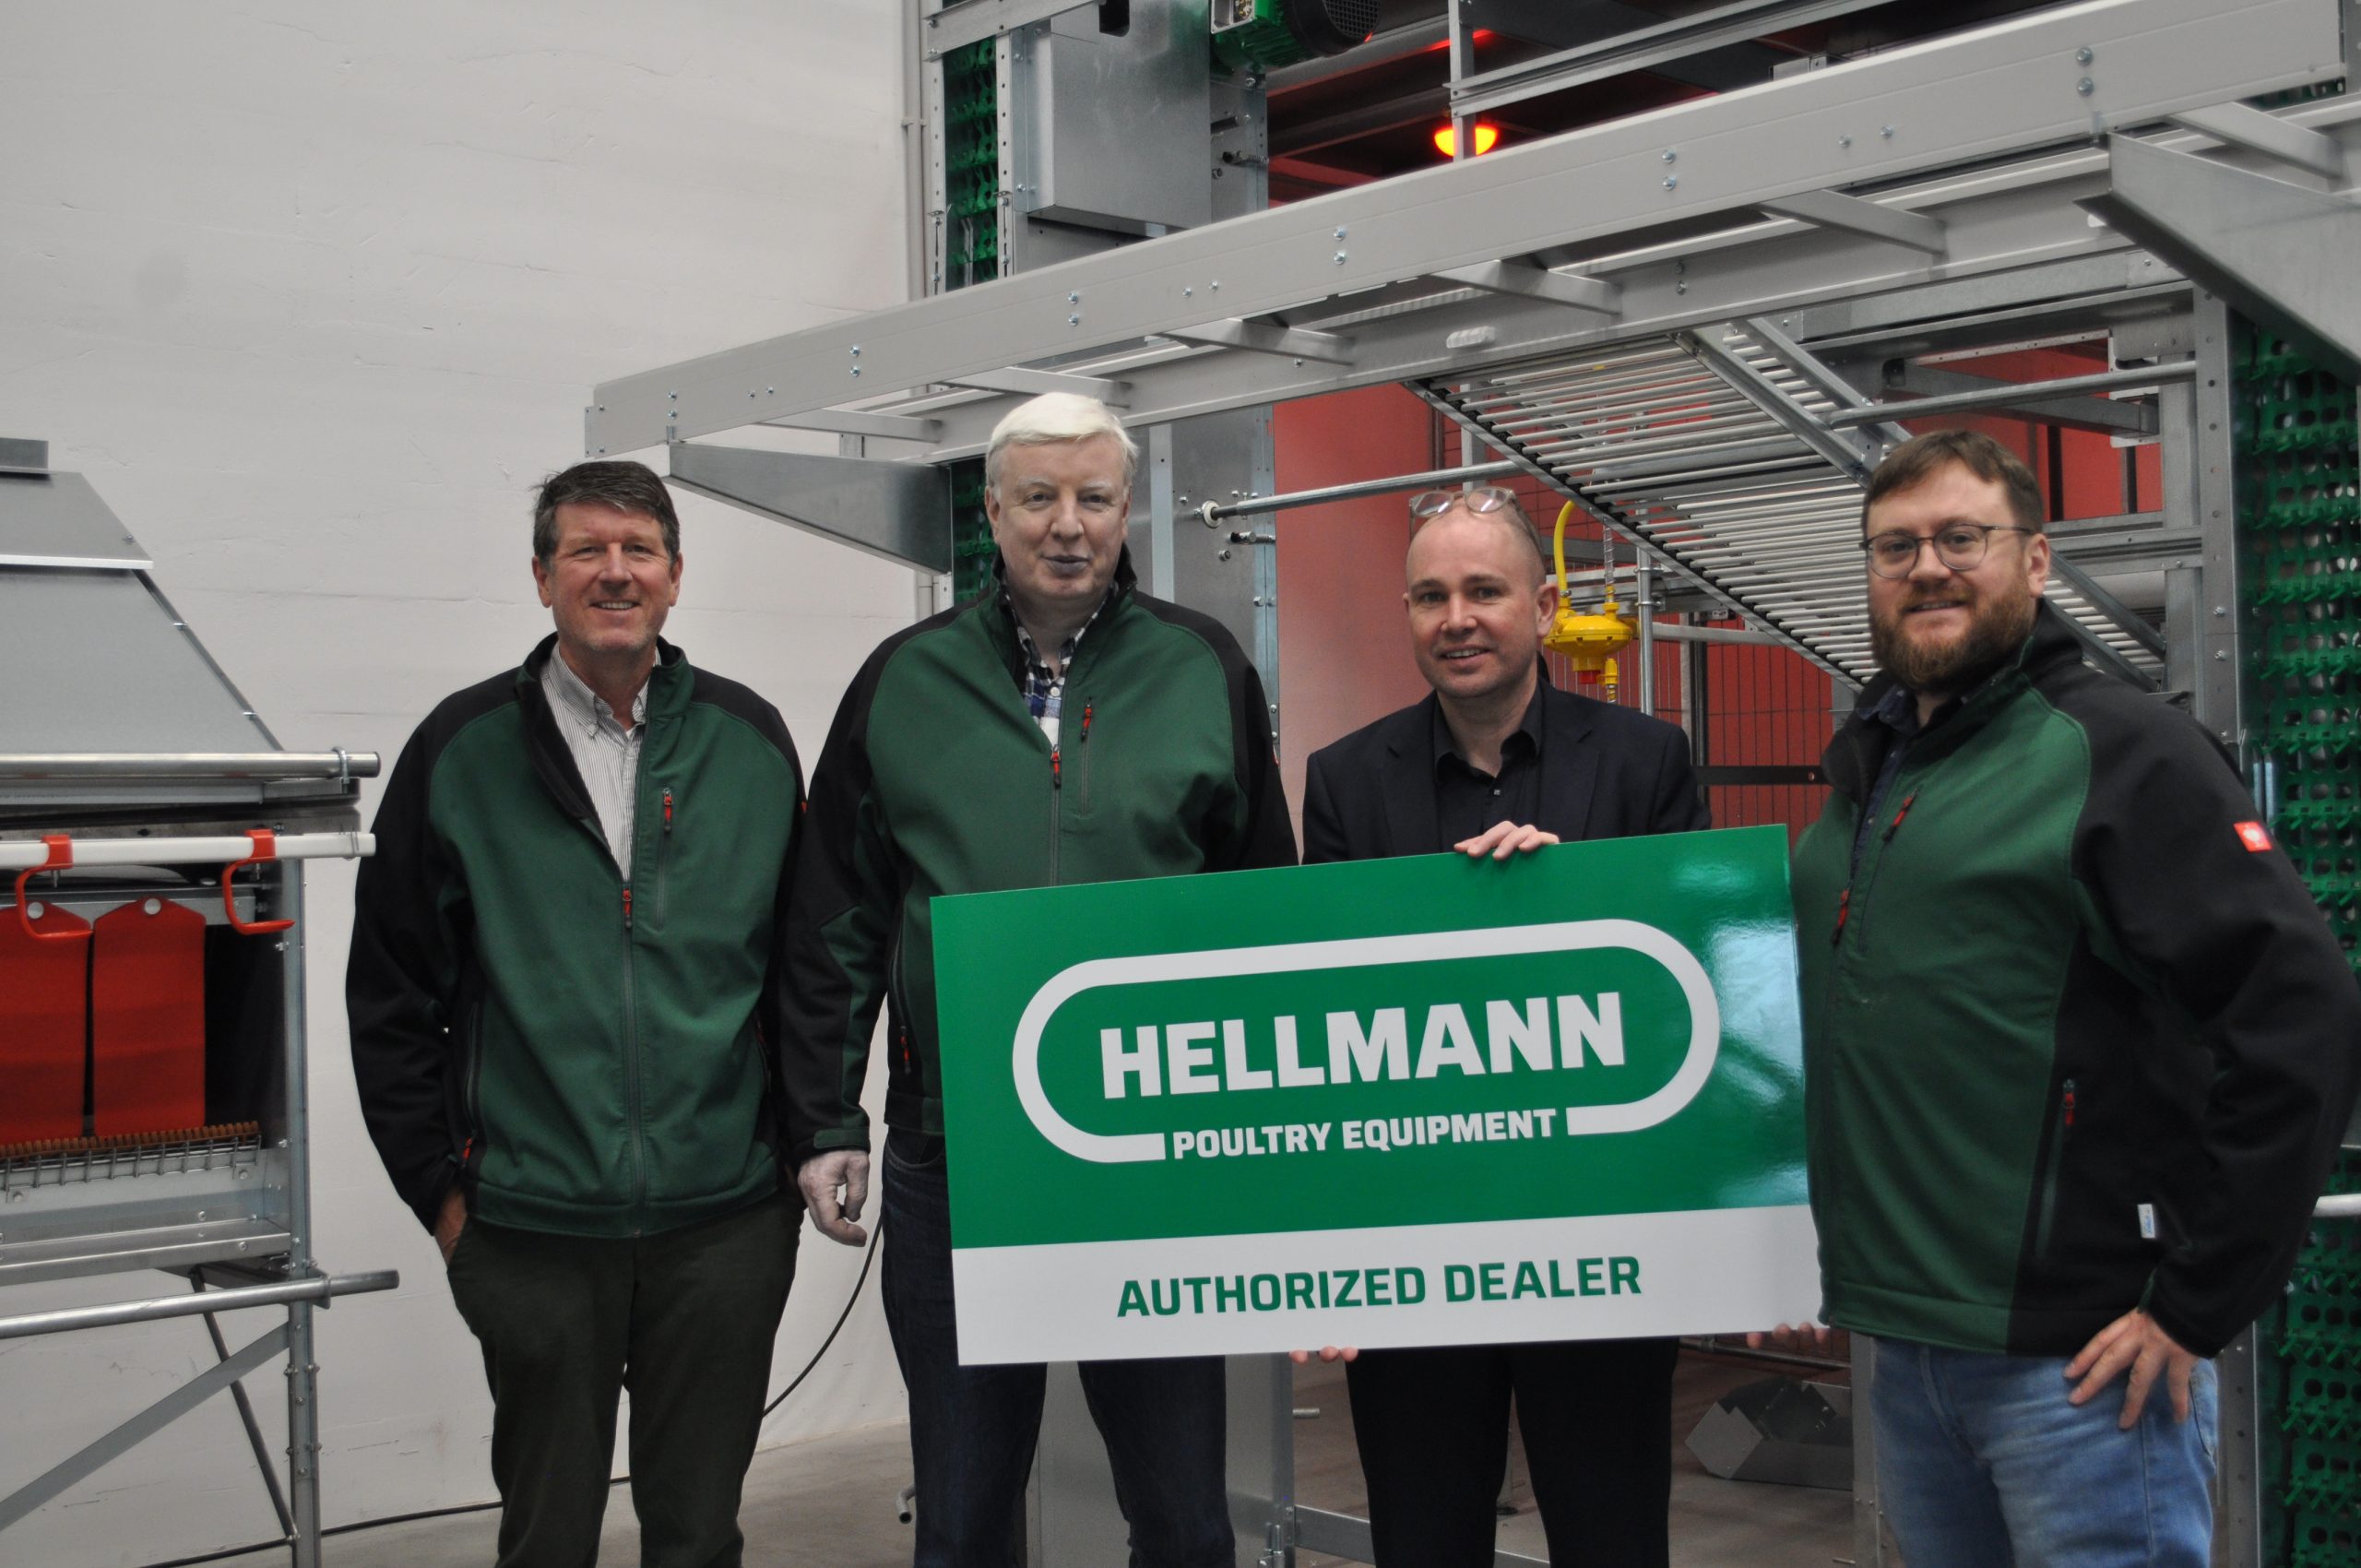 Avi-Green represents Hellmann Poultry in France